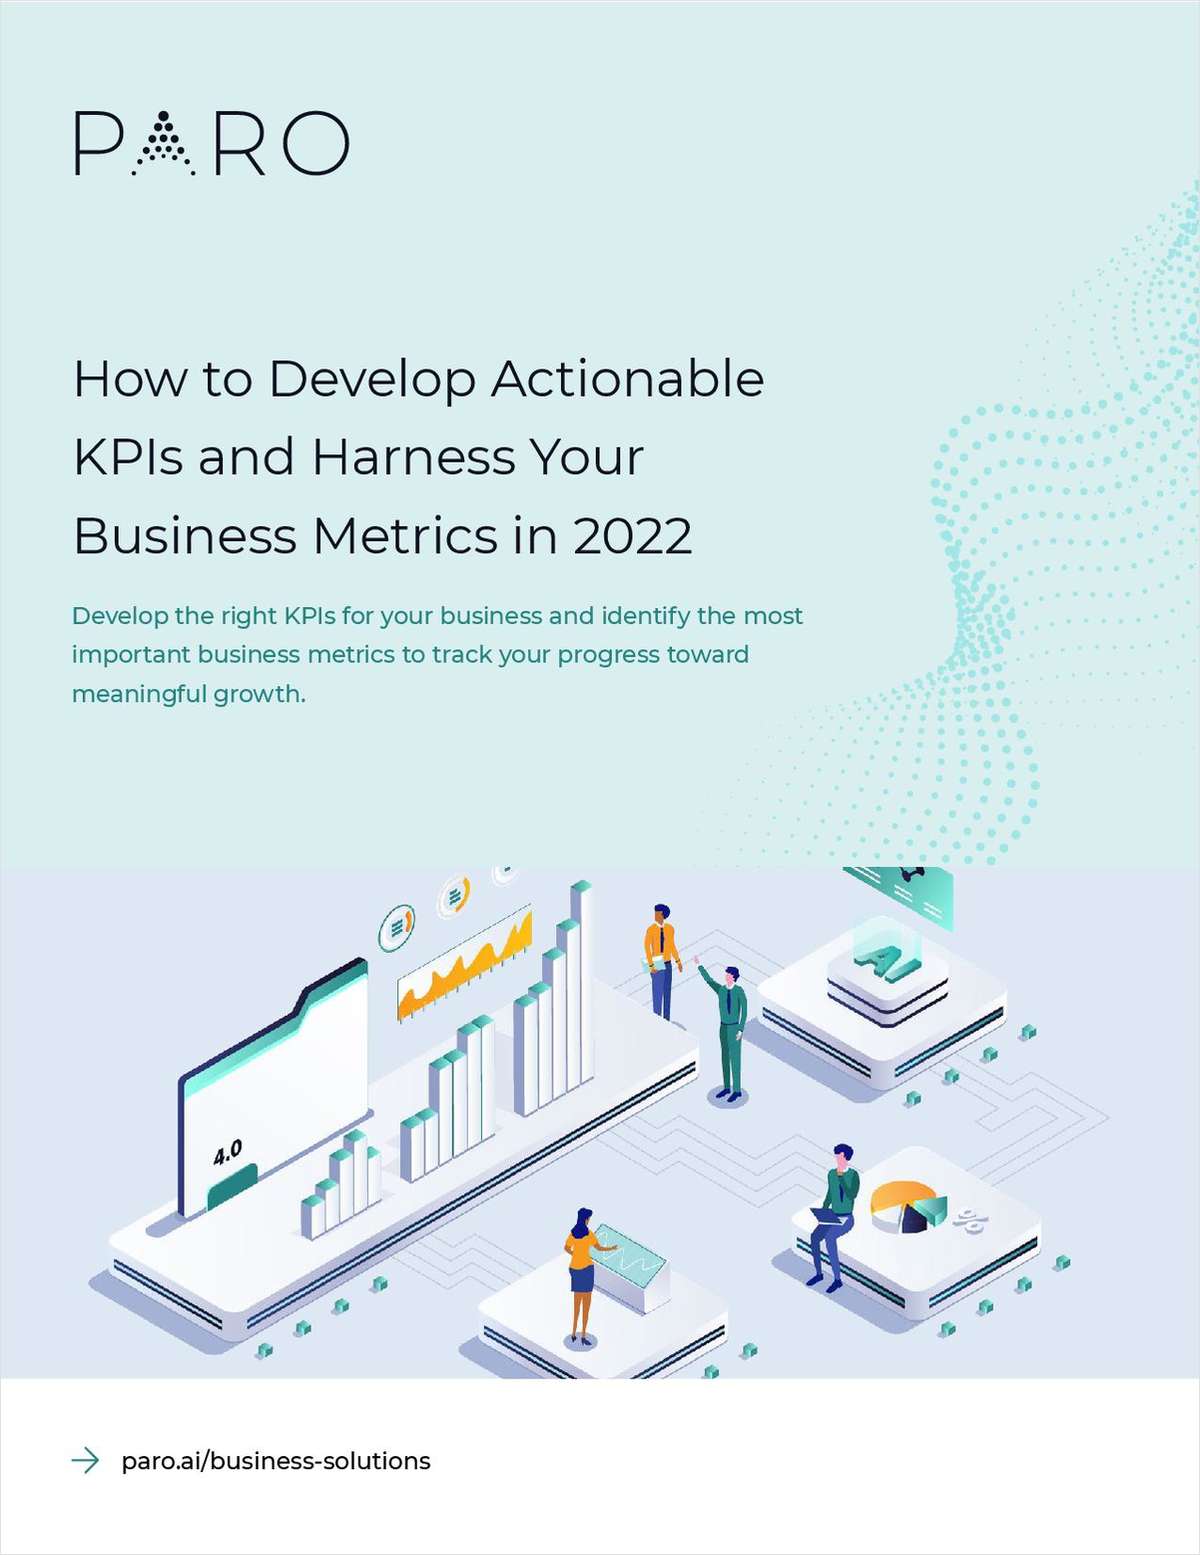 How to Develop Actionable KPIs and Harness Your Business Metrics in 2022